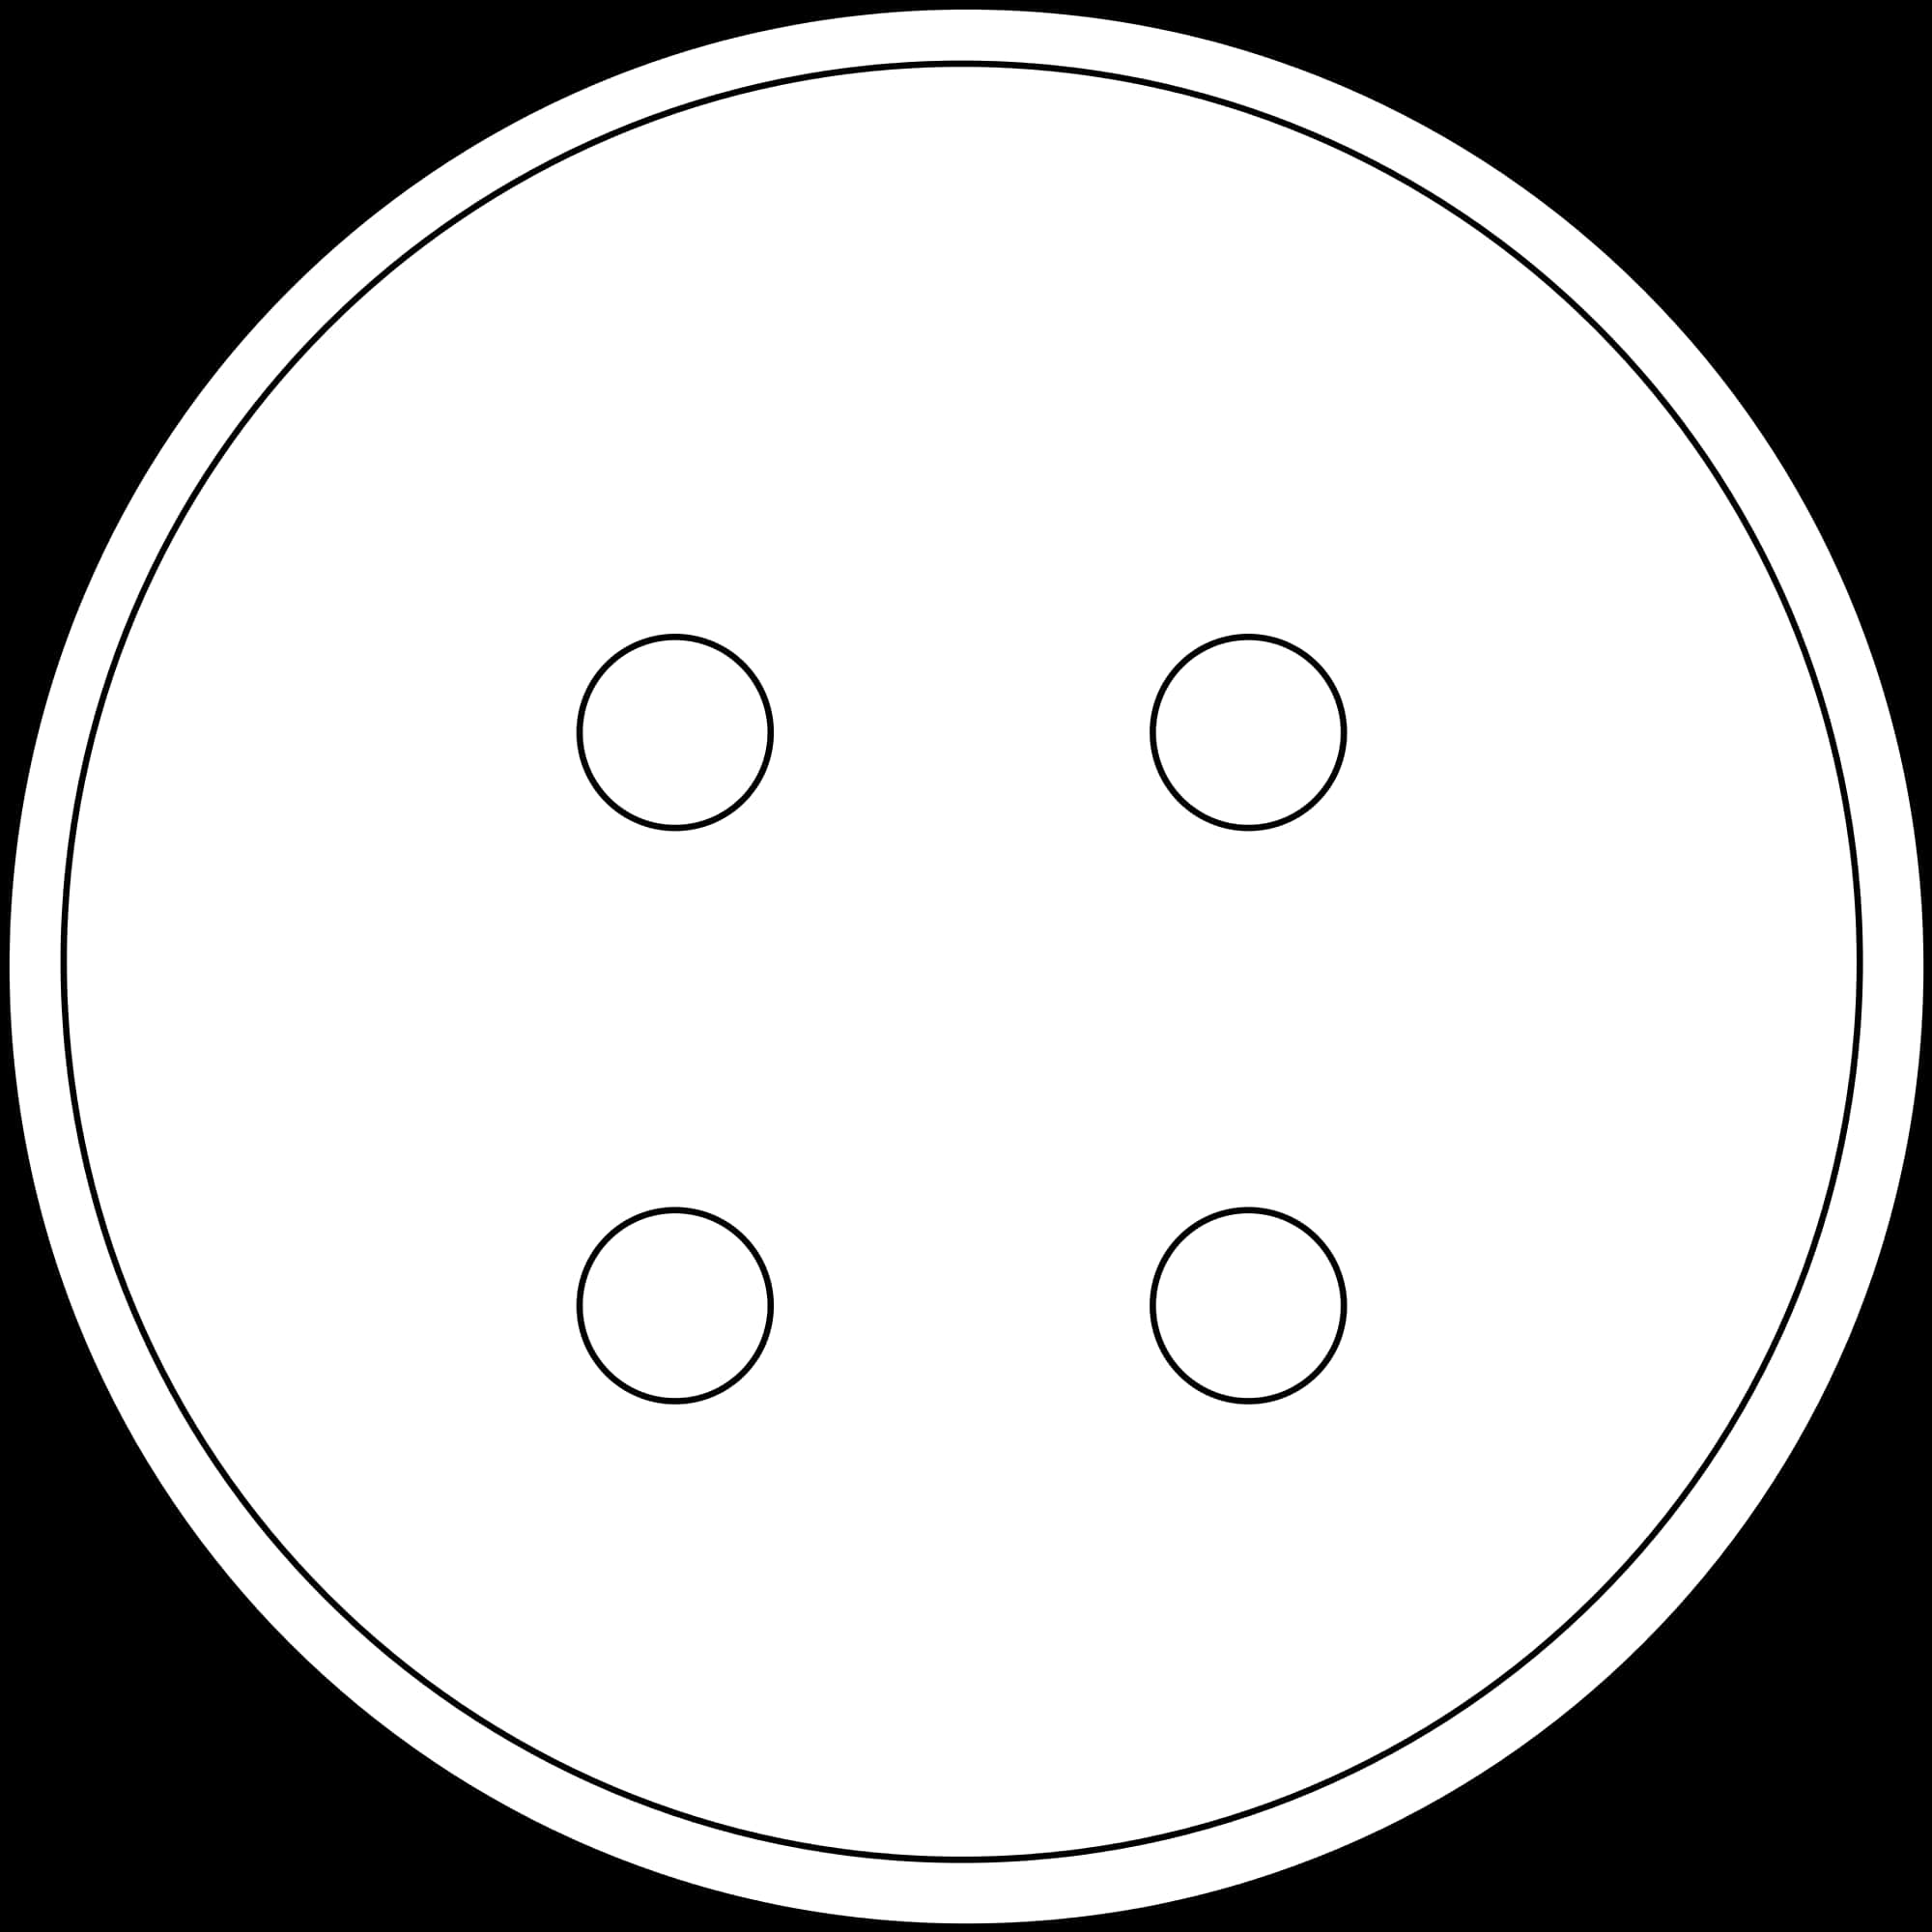 A White Circle With Black Dots